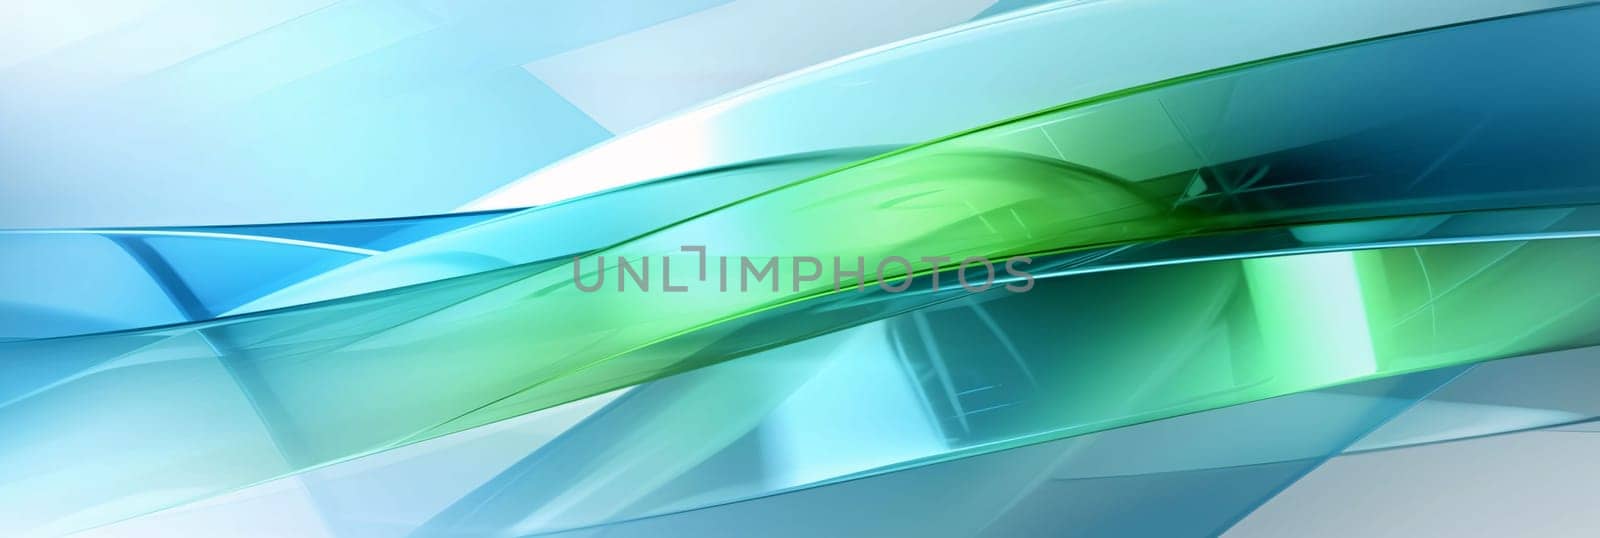 Abstract background design: 3d rendering, abstract background with blurred blue and green lines.